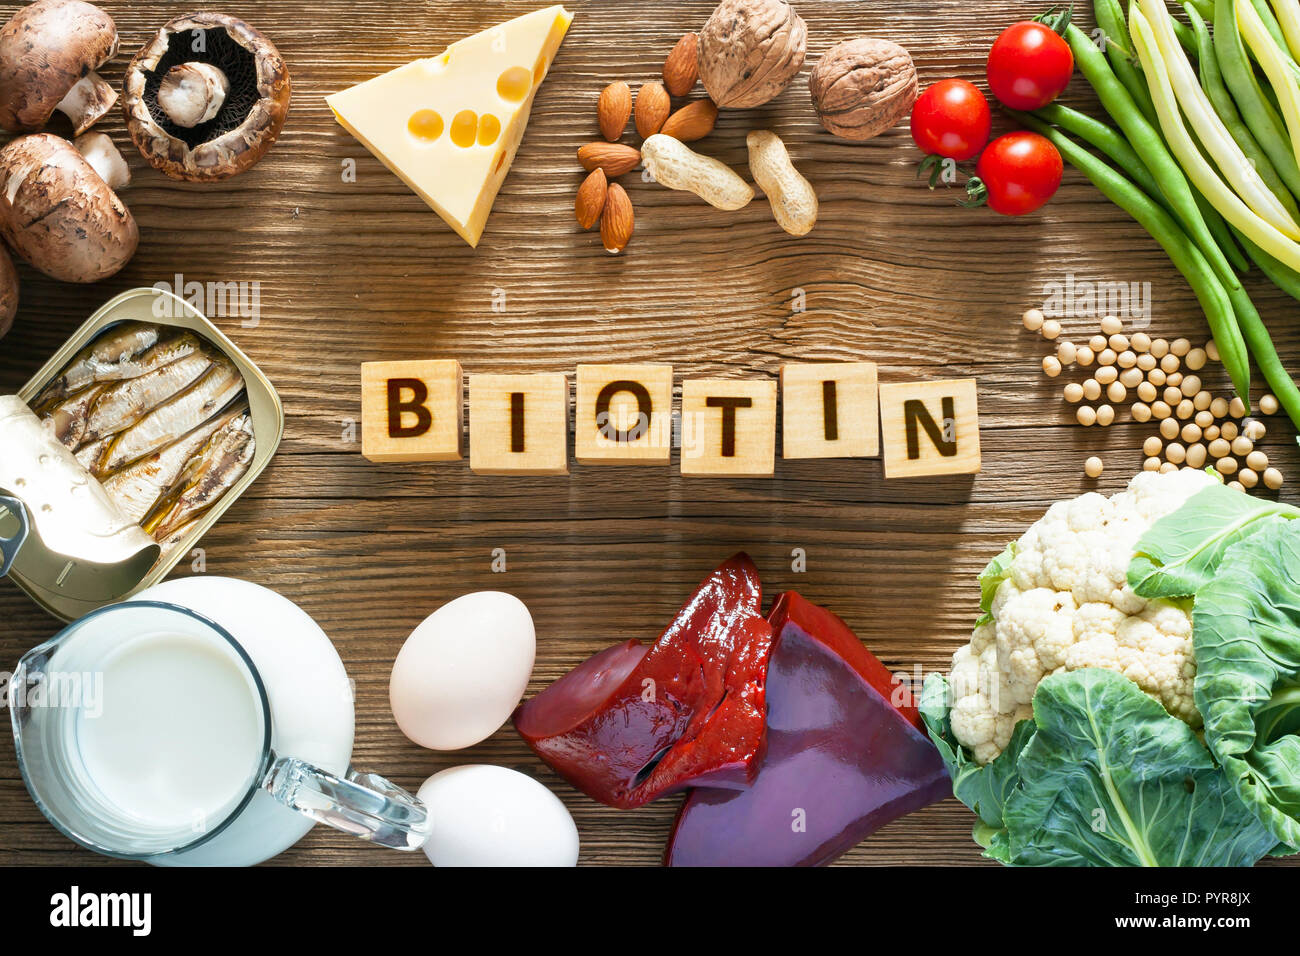 Foods rich in Biotin. Foods as liver, eggs, cheese, sardines, soybeans, milk, cauliflower, green beans, mushrooms, peanuts, walnuts and almonds on woo Stock Photo